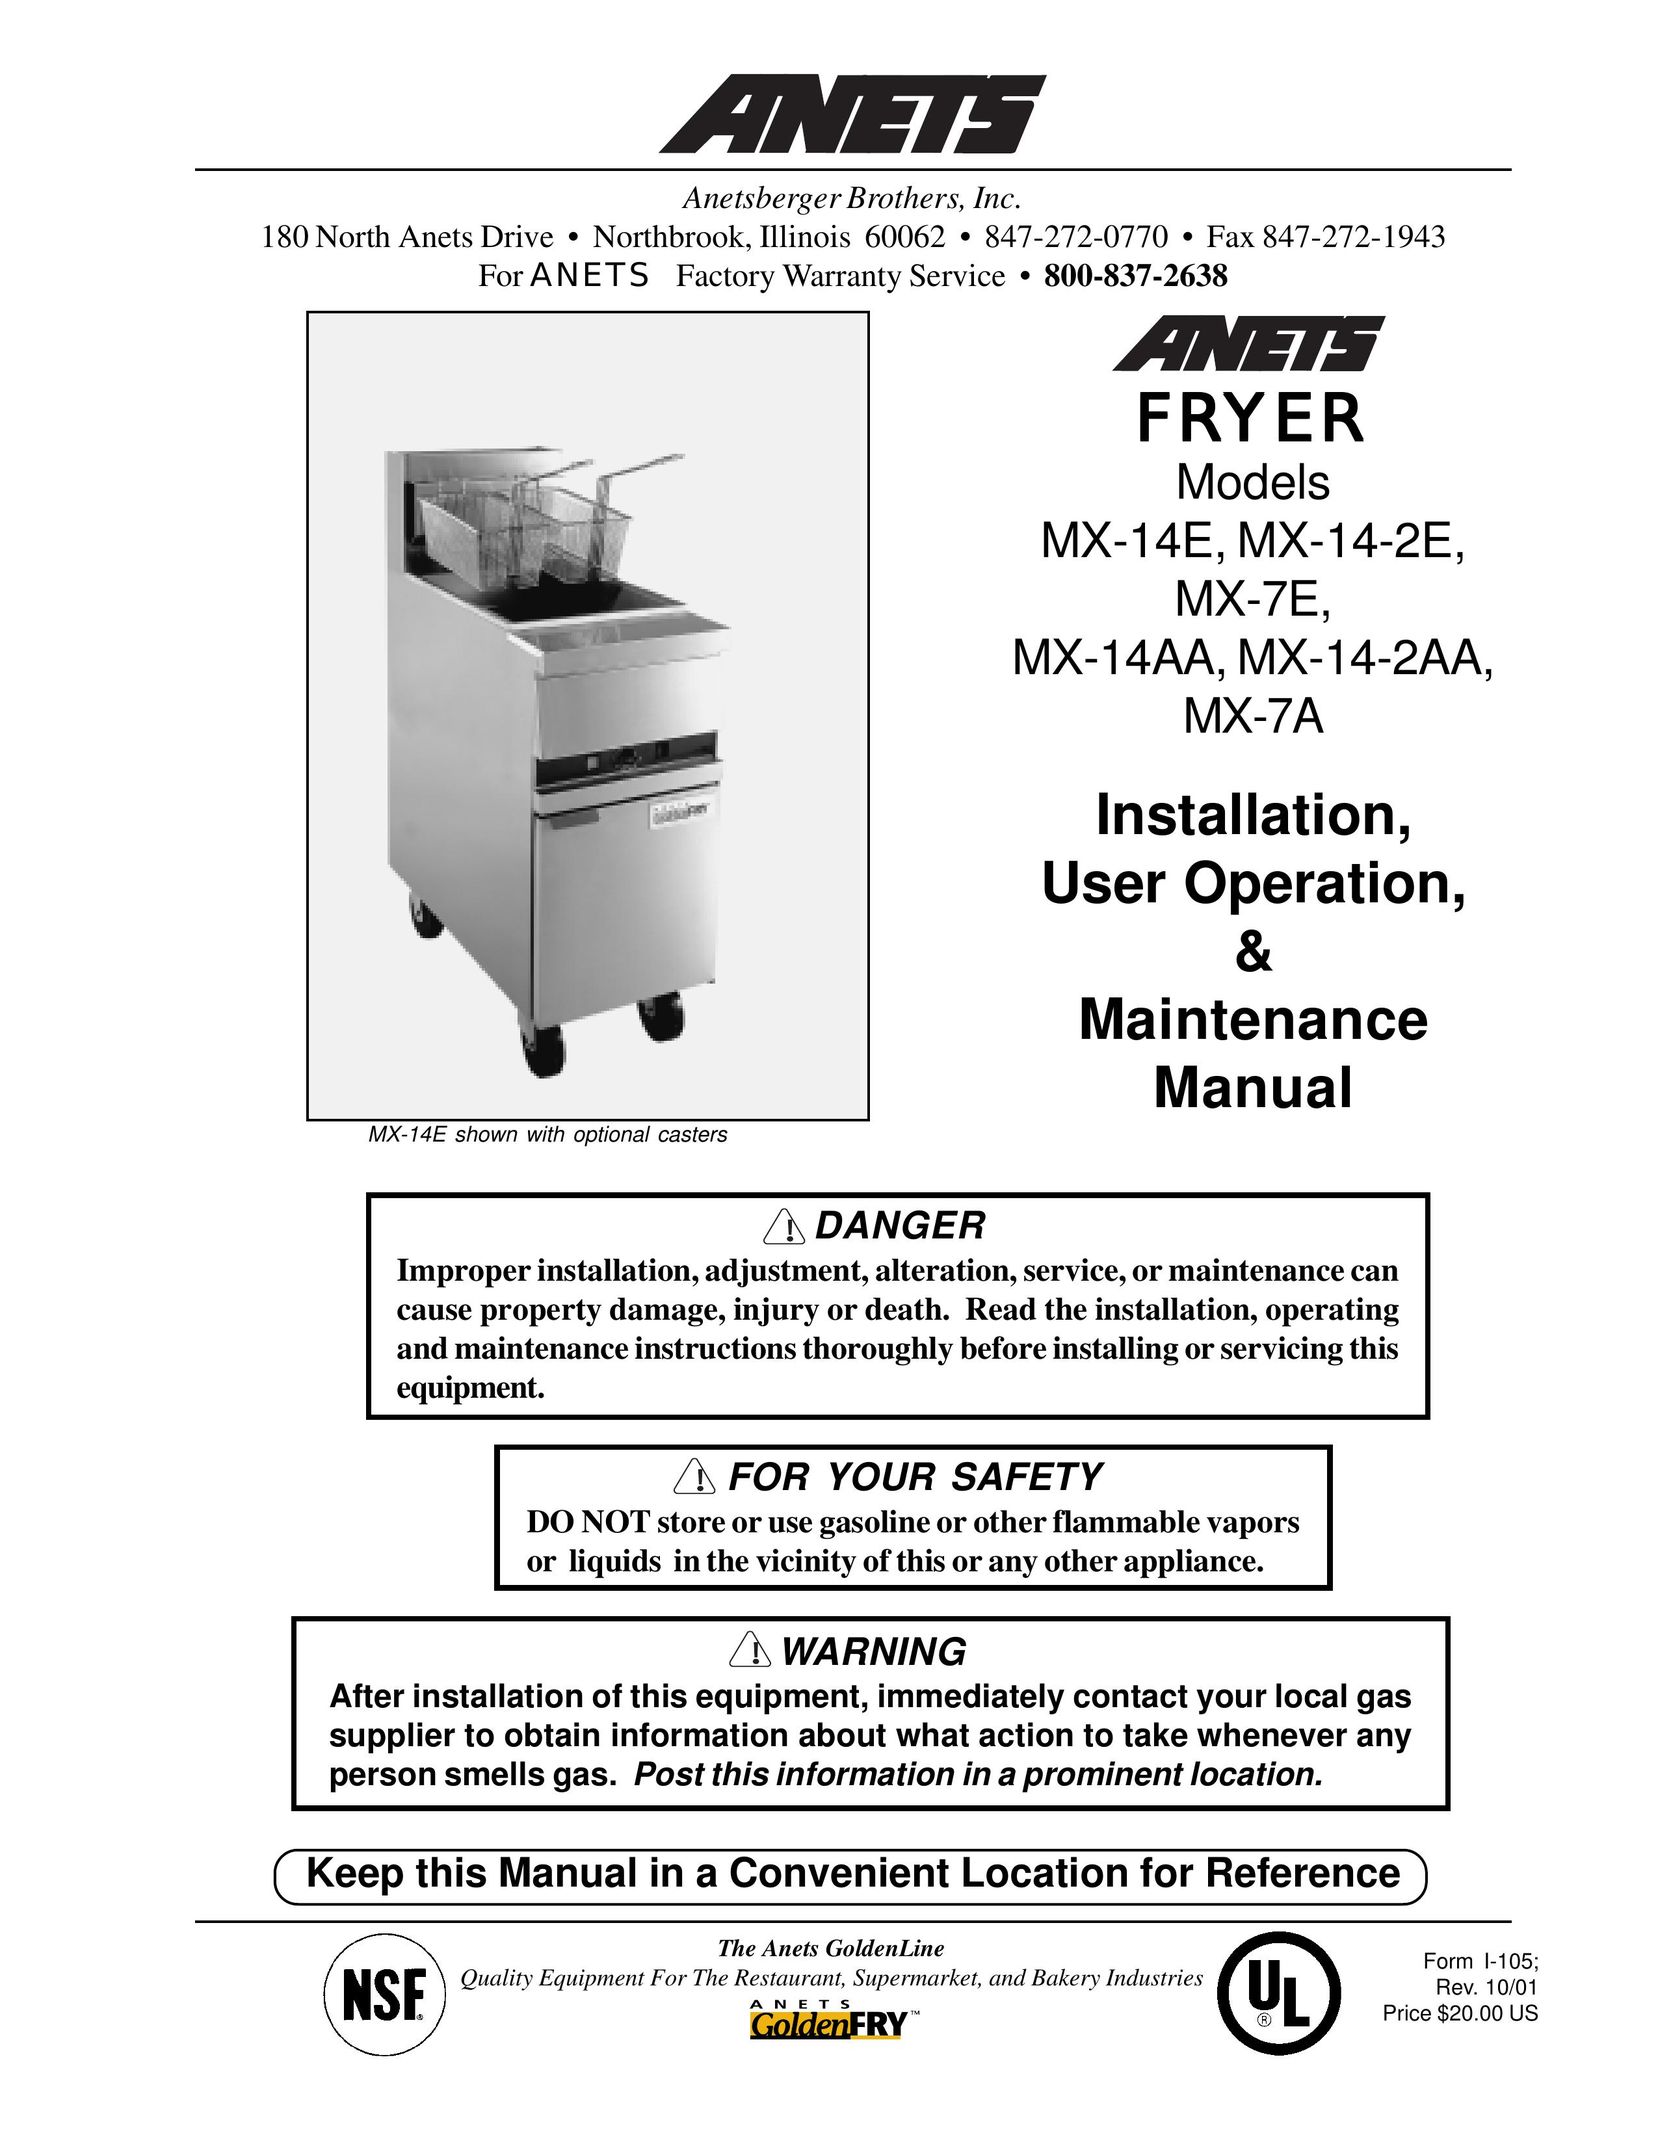 Anetsberger Brothers MX-14AA Fryer User Manual